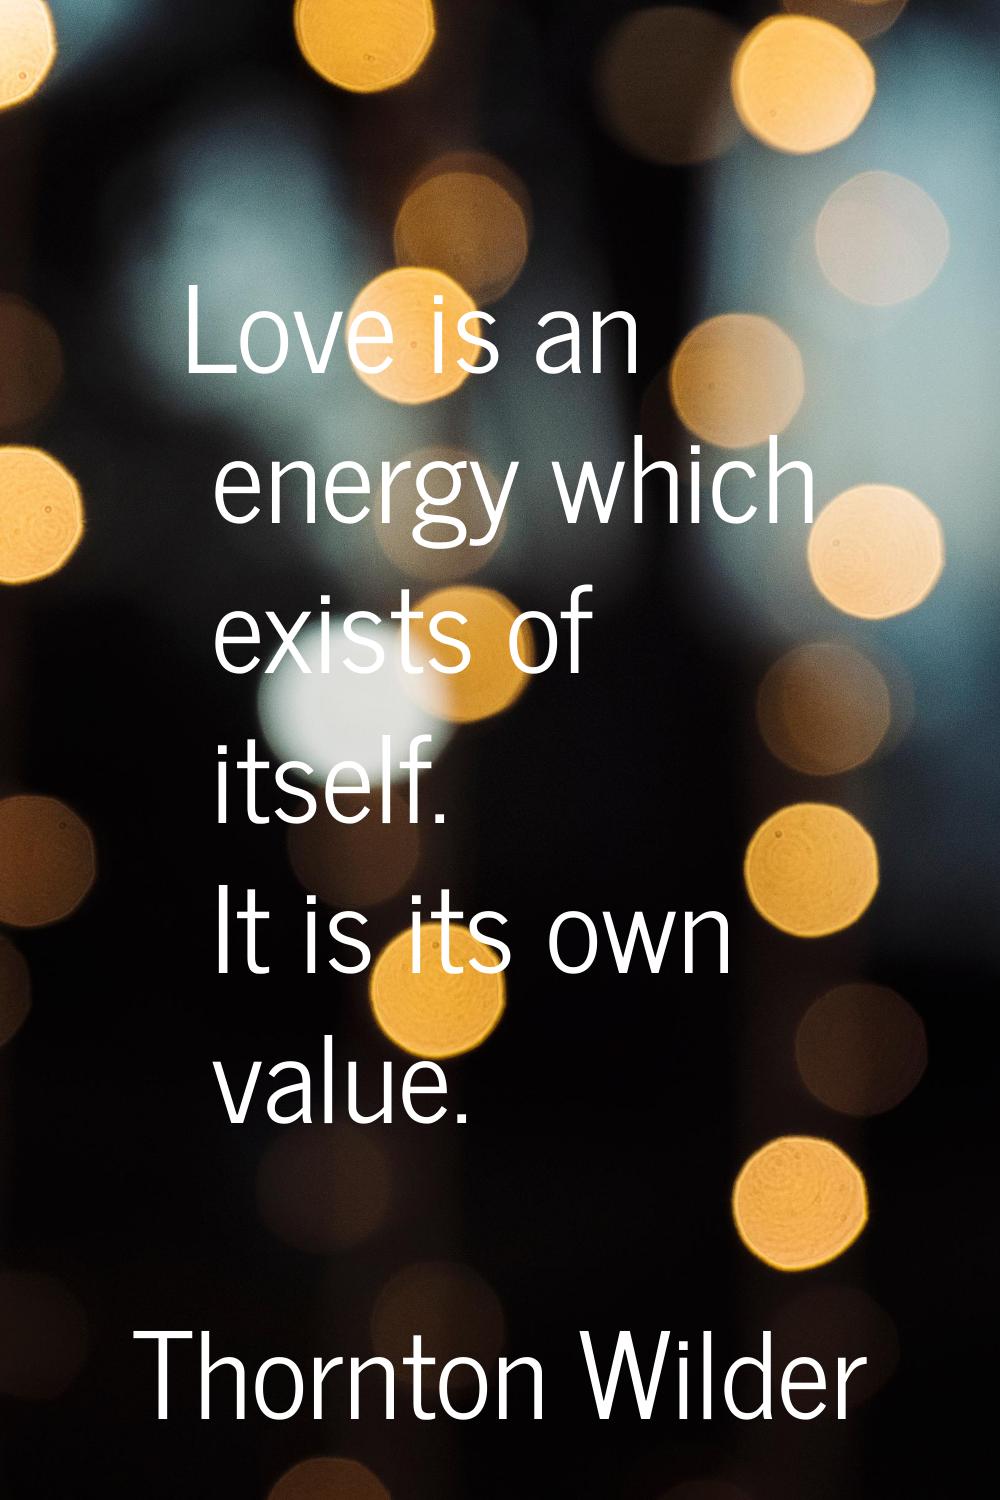 Love is an energy which exists of itself. It is its own value.